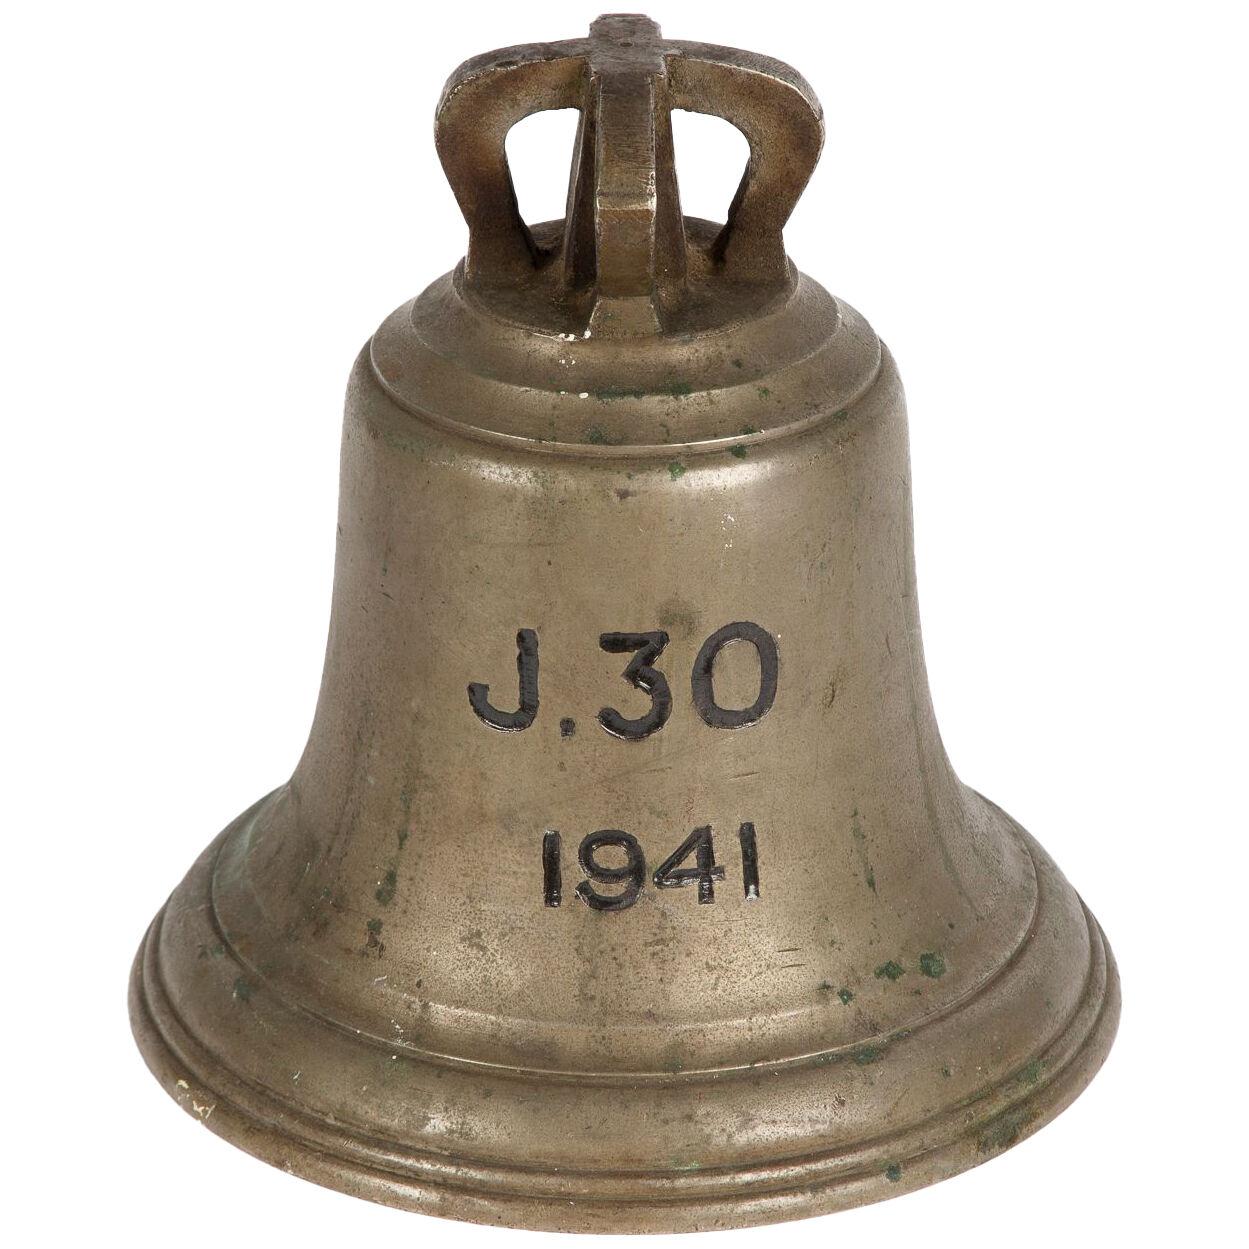  WWII ship's bell from the HMS Queen of Thanet used in the Dunkirk evacuation